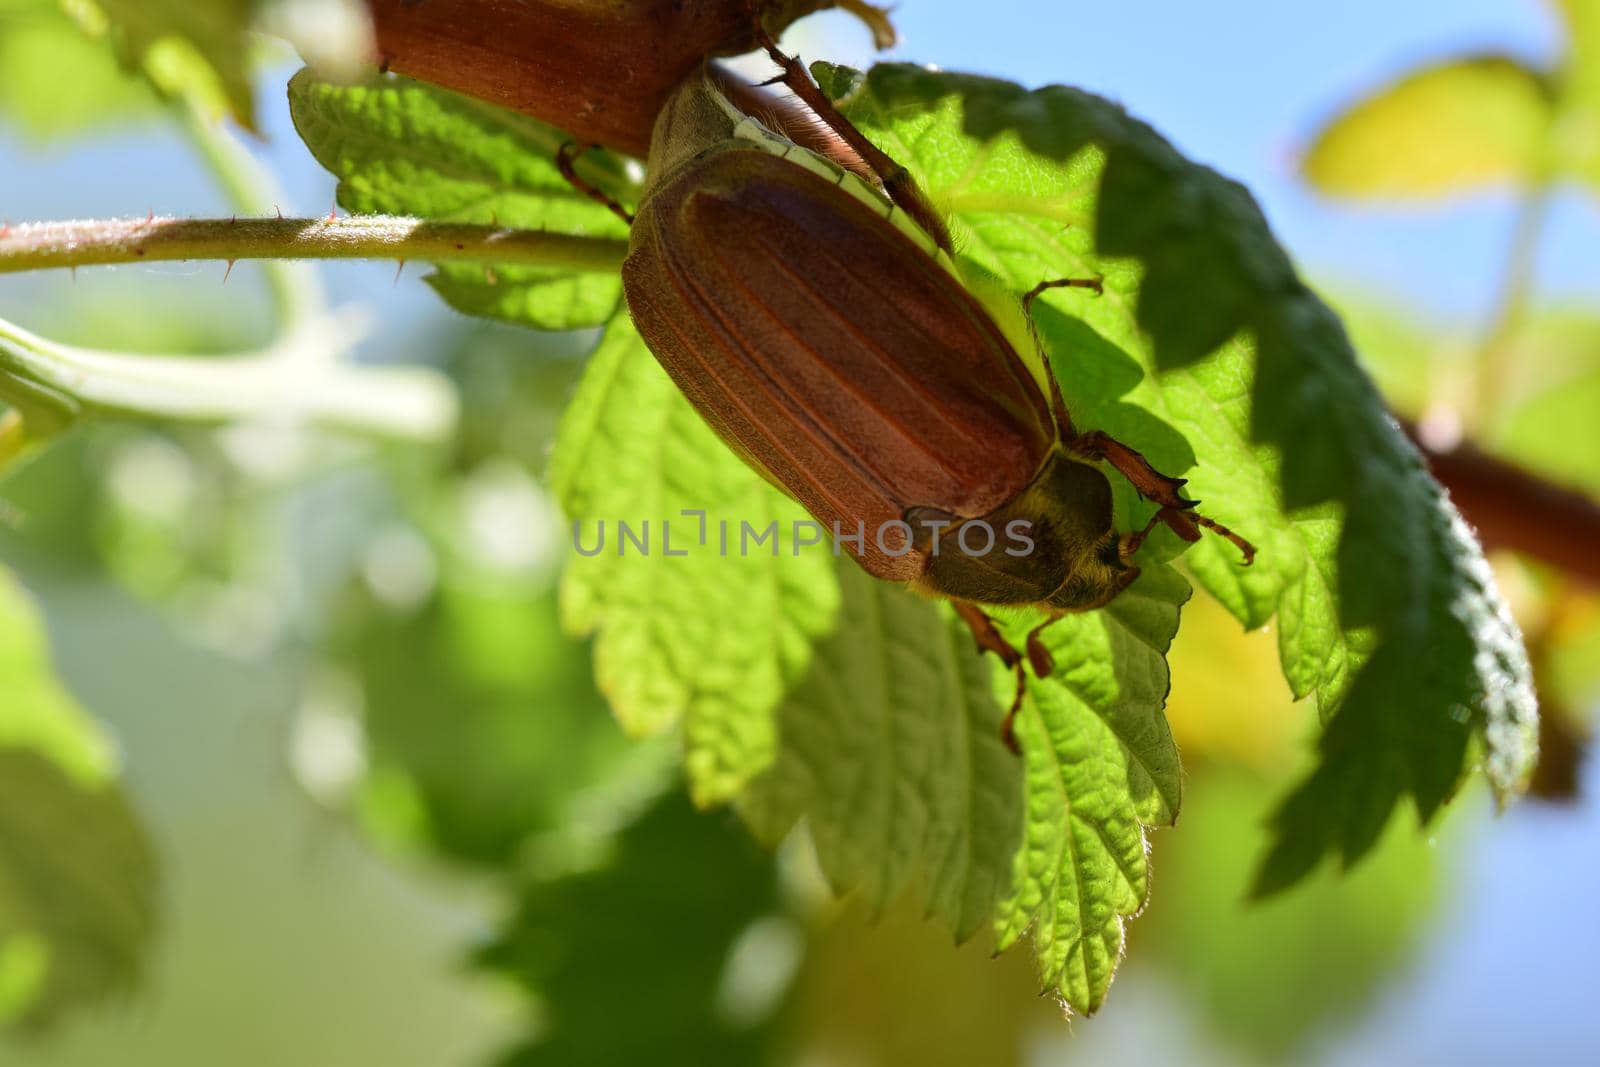 A may beetle sits under a raspberry leaf by Luise123